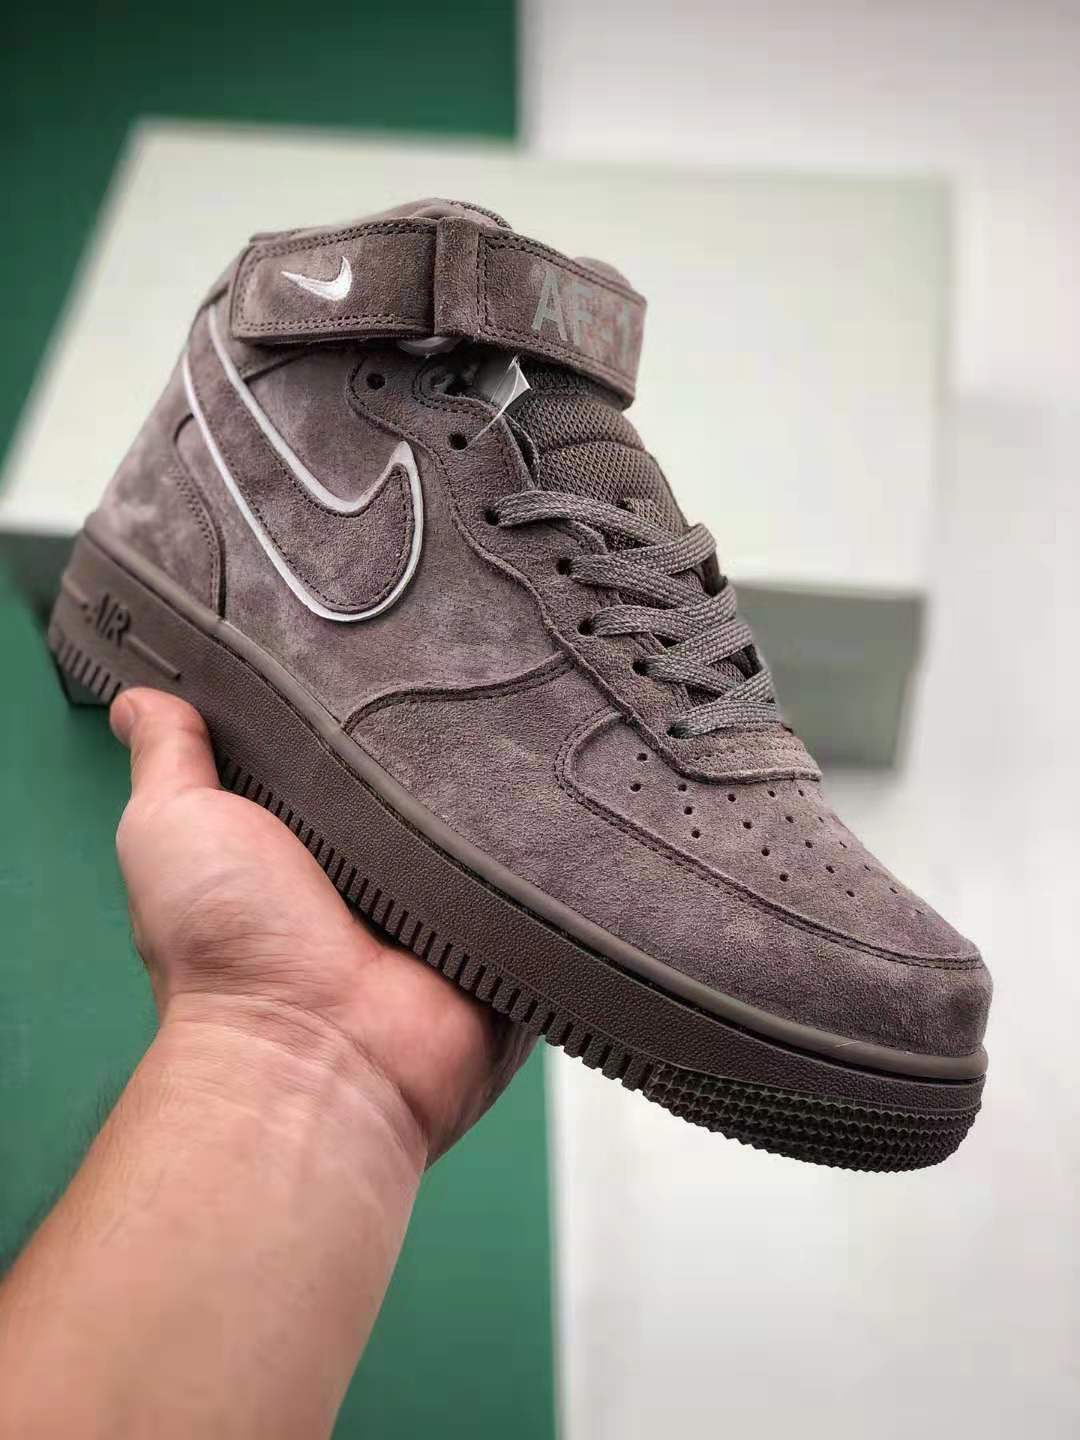 Nike Air Force 1 High '07 LV8 Suede Atmosphere Grey - Buy Now at Affordable Prices!